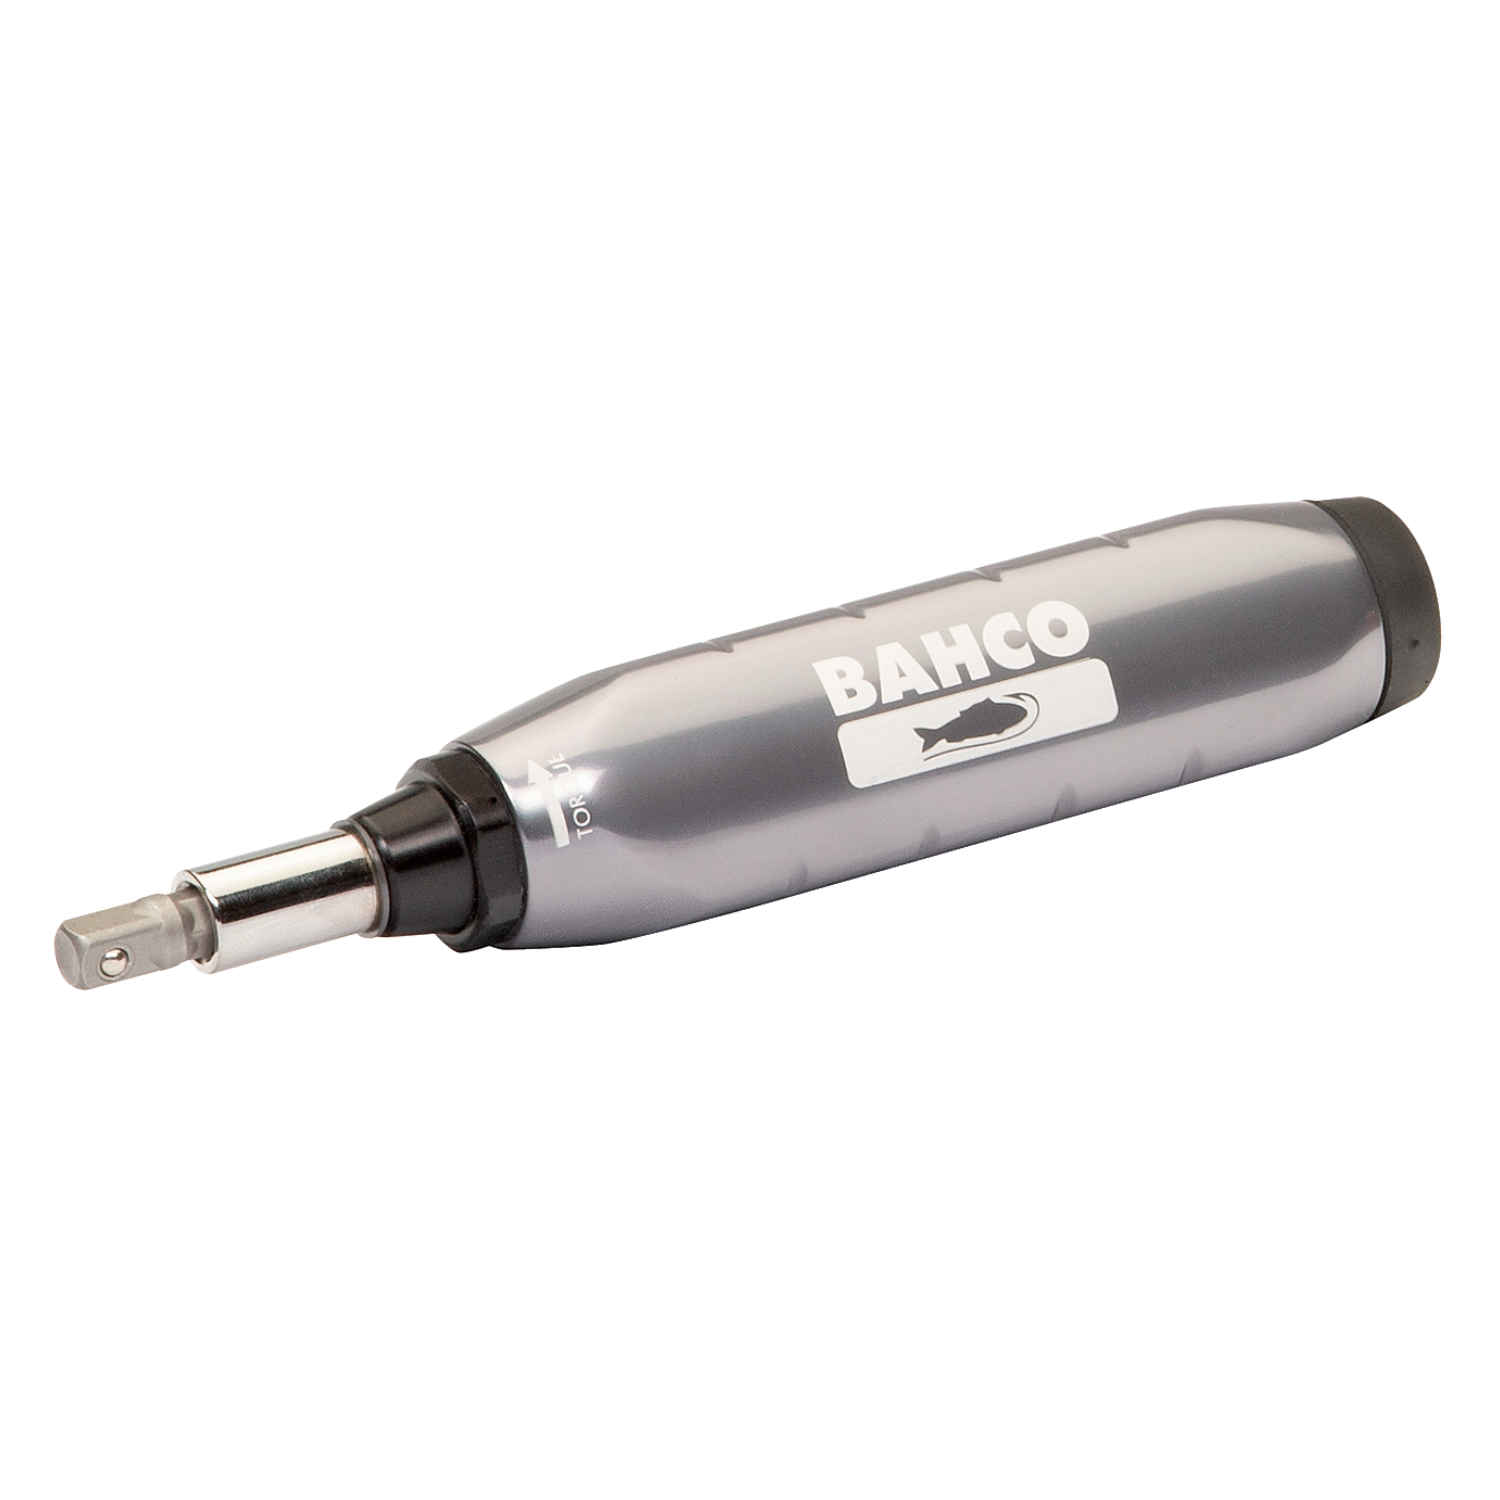 BAHCO 6873N-6880N Preset Torque Screwdriver with Window Scale - Premium Preset Torque from BAHCO - Shop now at Yew Aik.